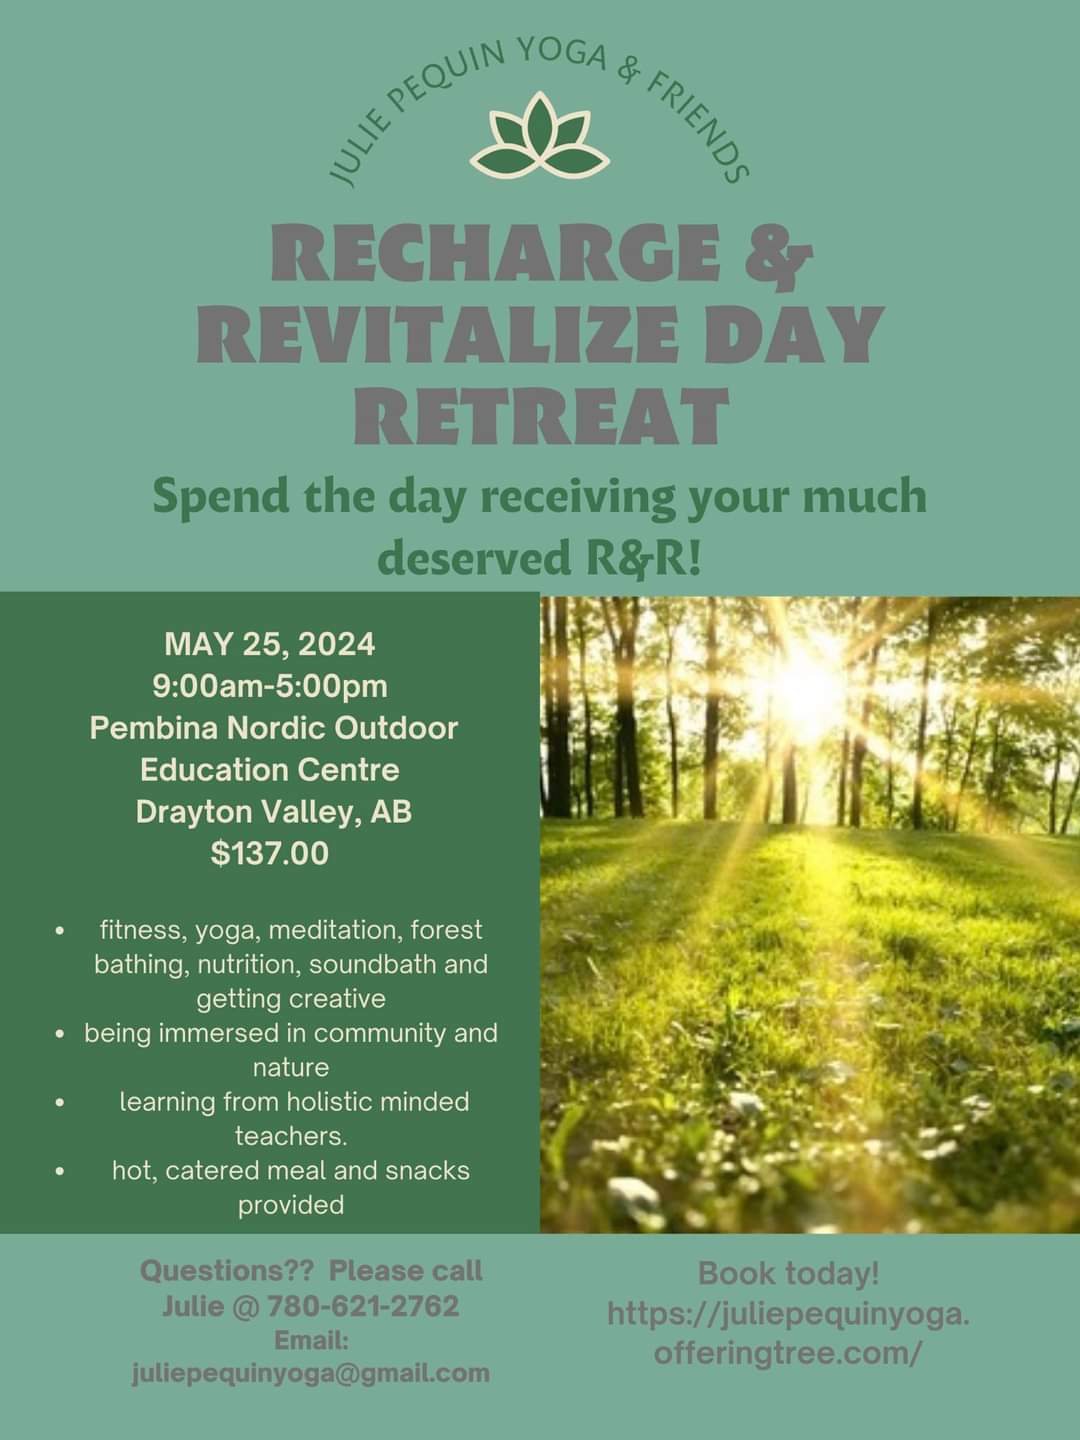 Recharge & Revitalize Day Retreat